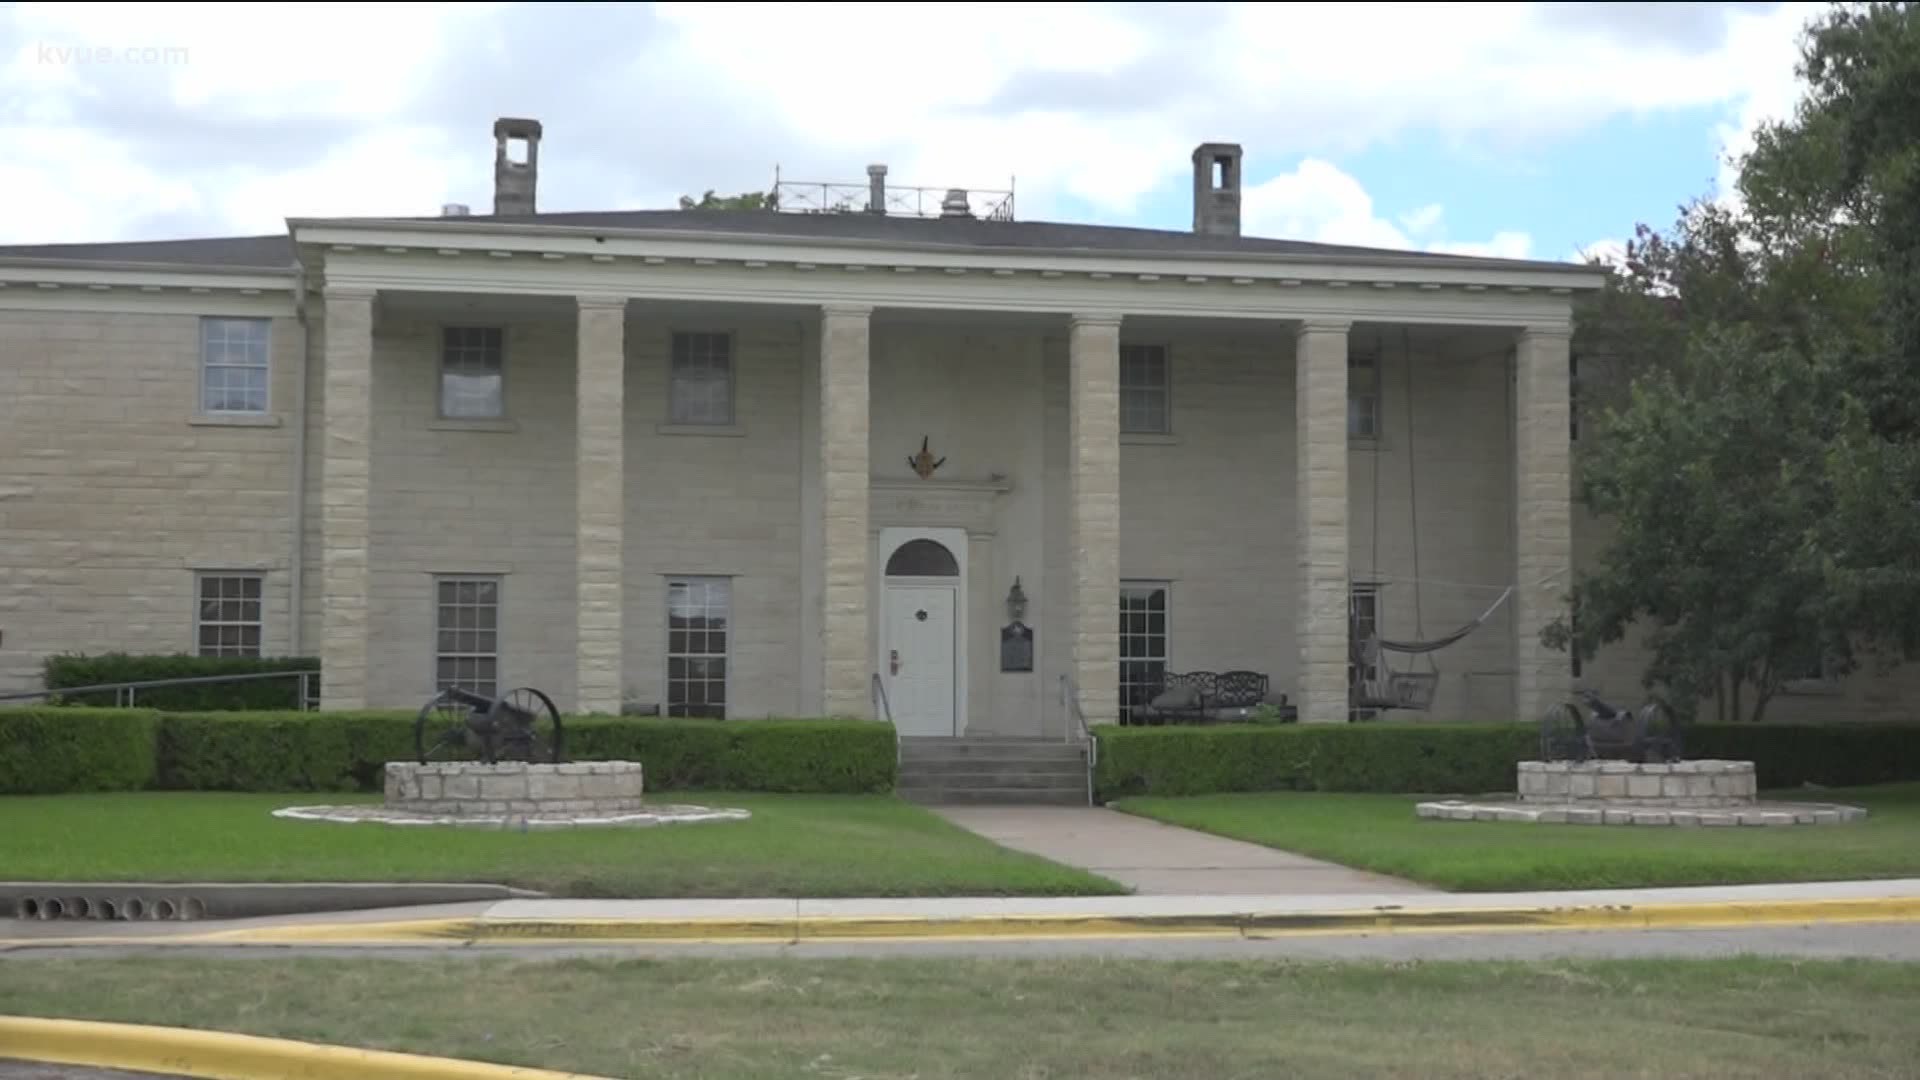 A fraternity at Southwestern University has been suspended by its national chapter over a social media post denouncing the Confederacy and Robert E. Lee.